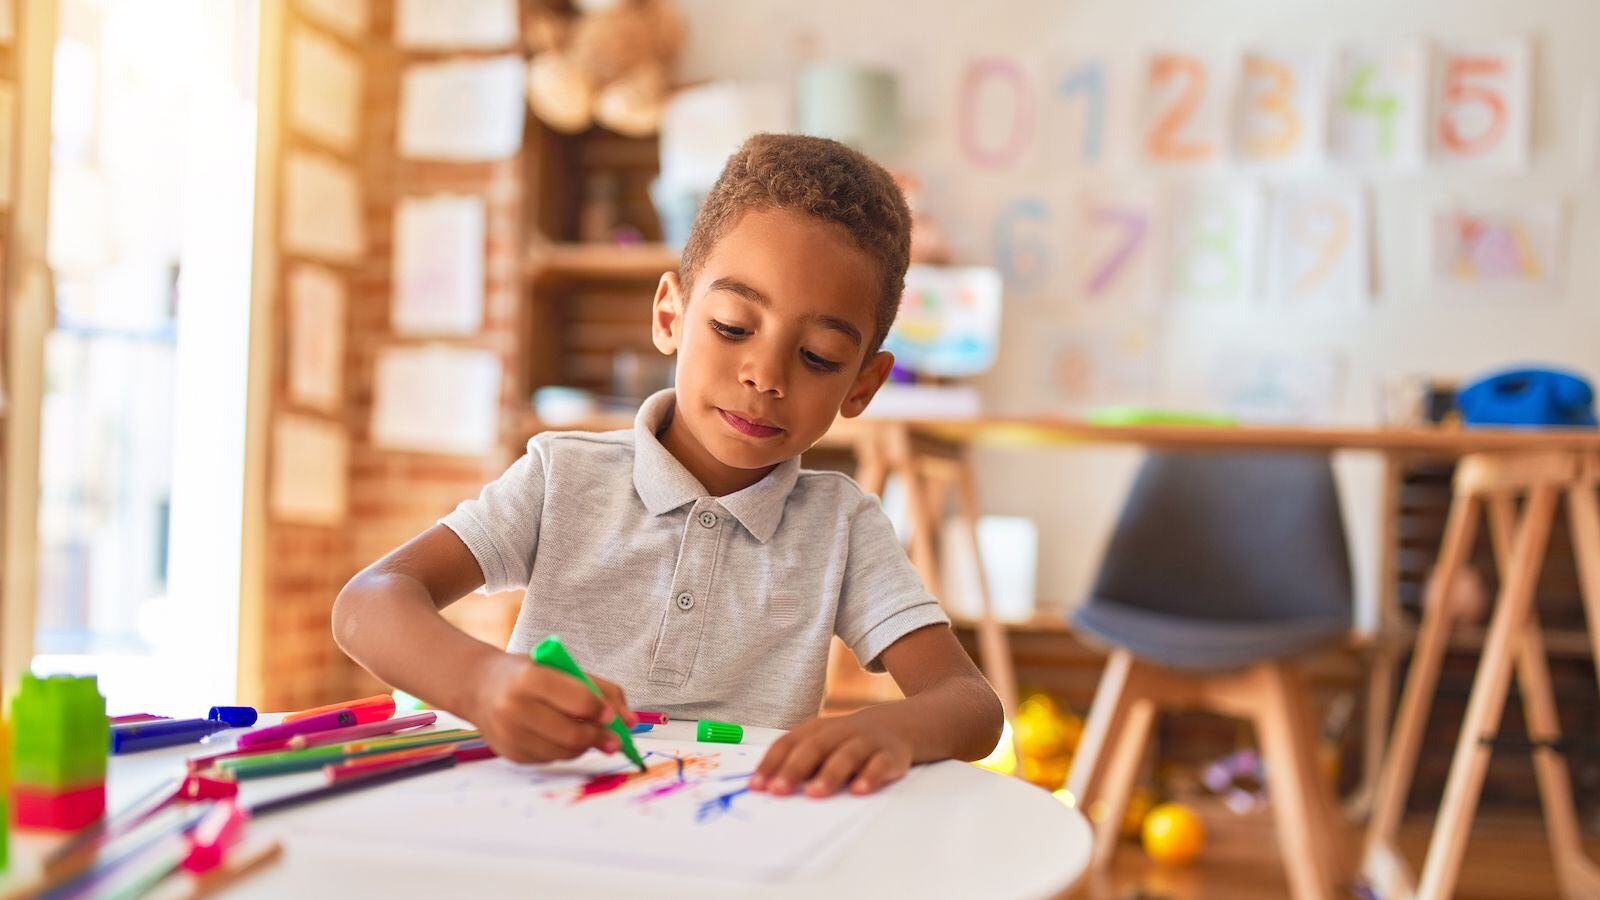 School supplies help children start a new school year feeling empowered and ready to learn. And though a backpack filled with pencils and markers may seem like a small thing to some, it's an unaffordable luxury for others.